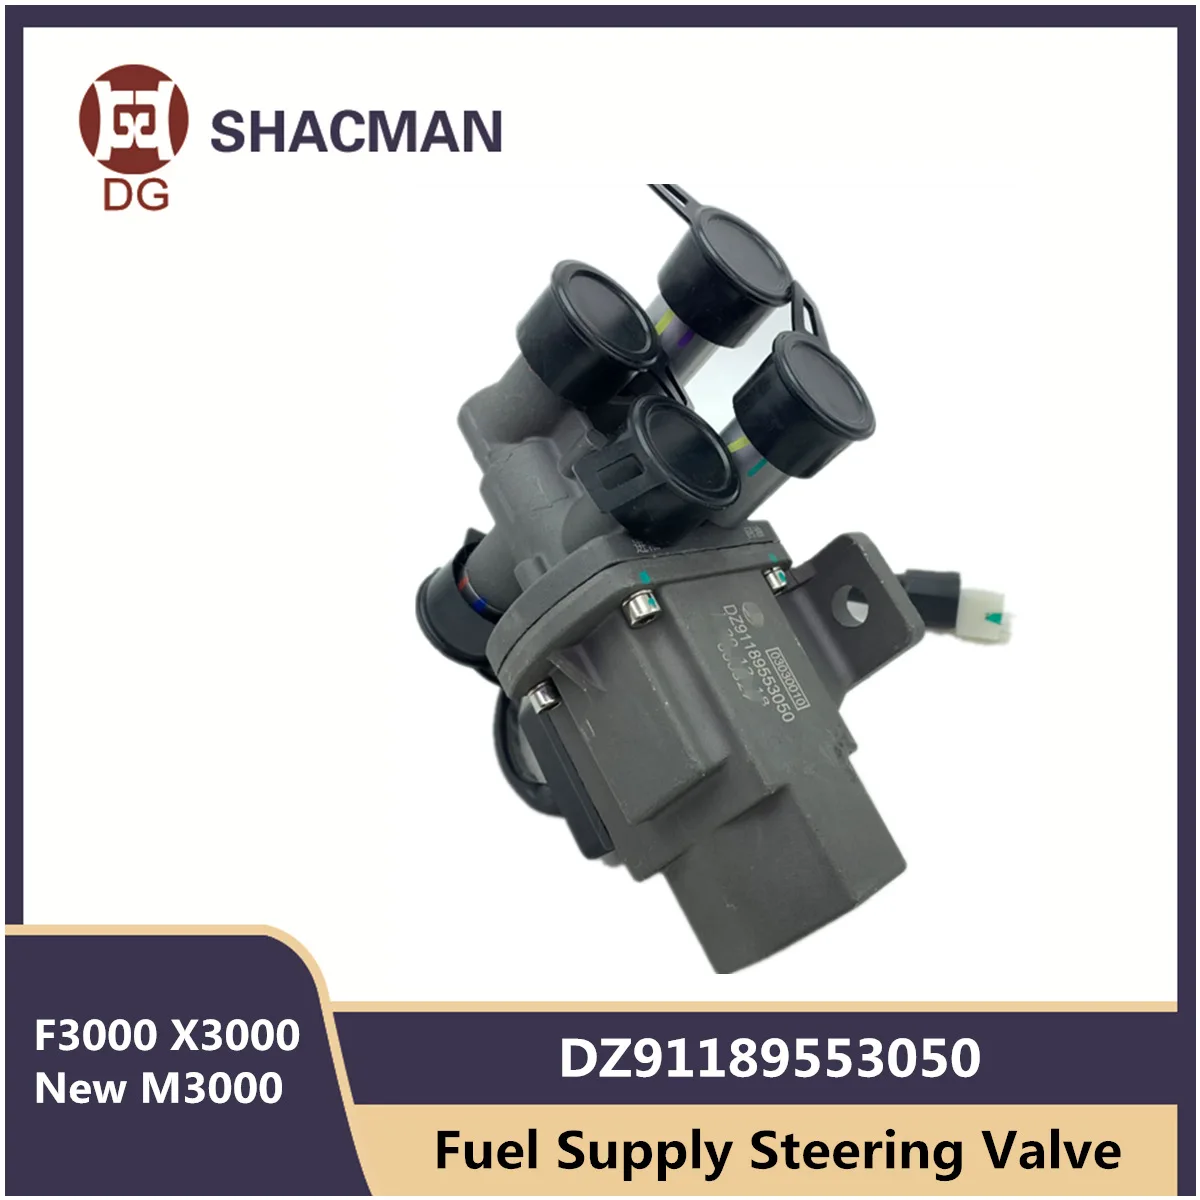 

Fuel Supply Steering Valve DZ91189553050 For SHACMAN F3000 New M3000 X3000 Main Auxiliary Fuel Tank Switch Original Truck Parts